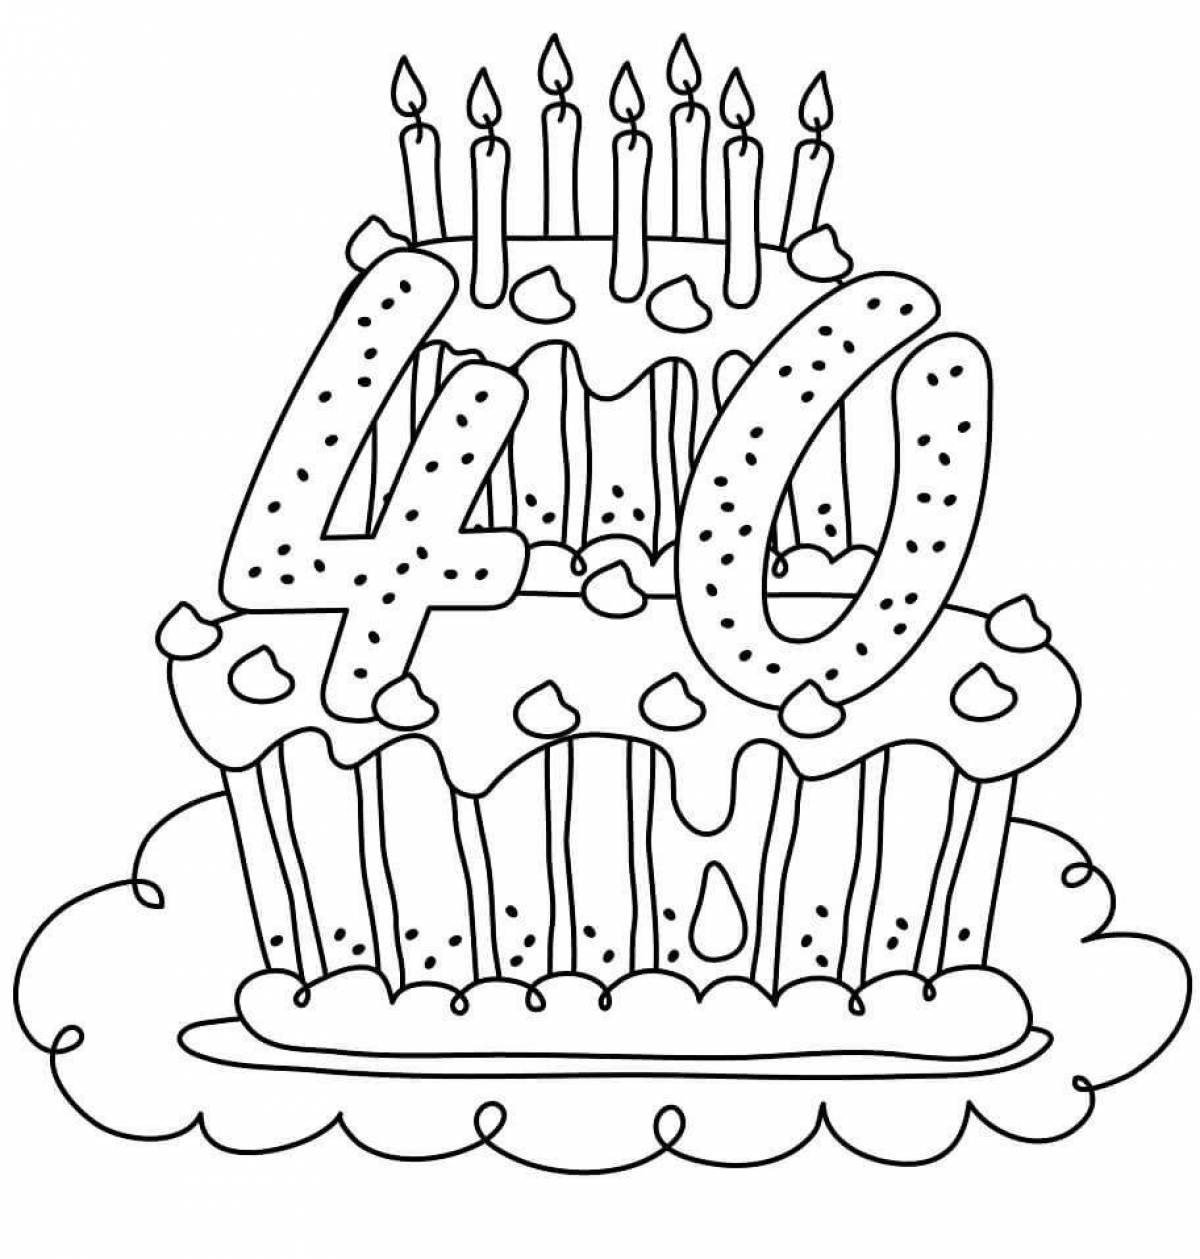 A wonderful birthday coloring book